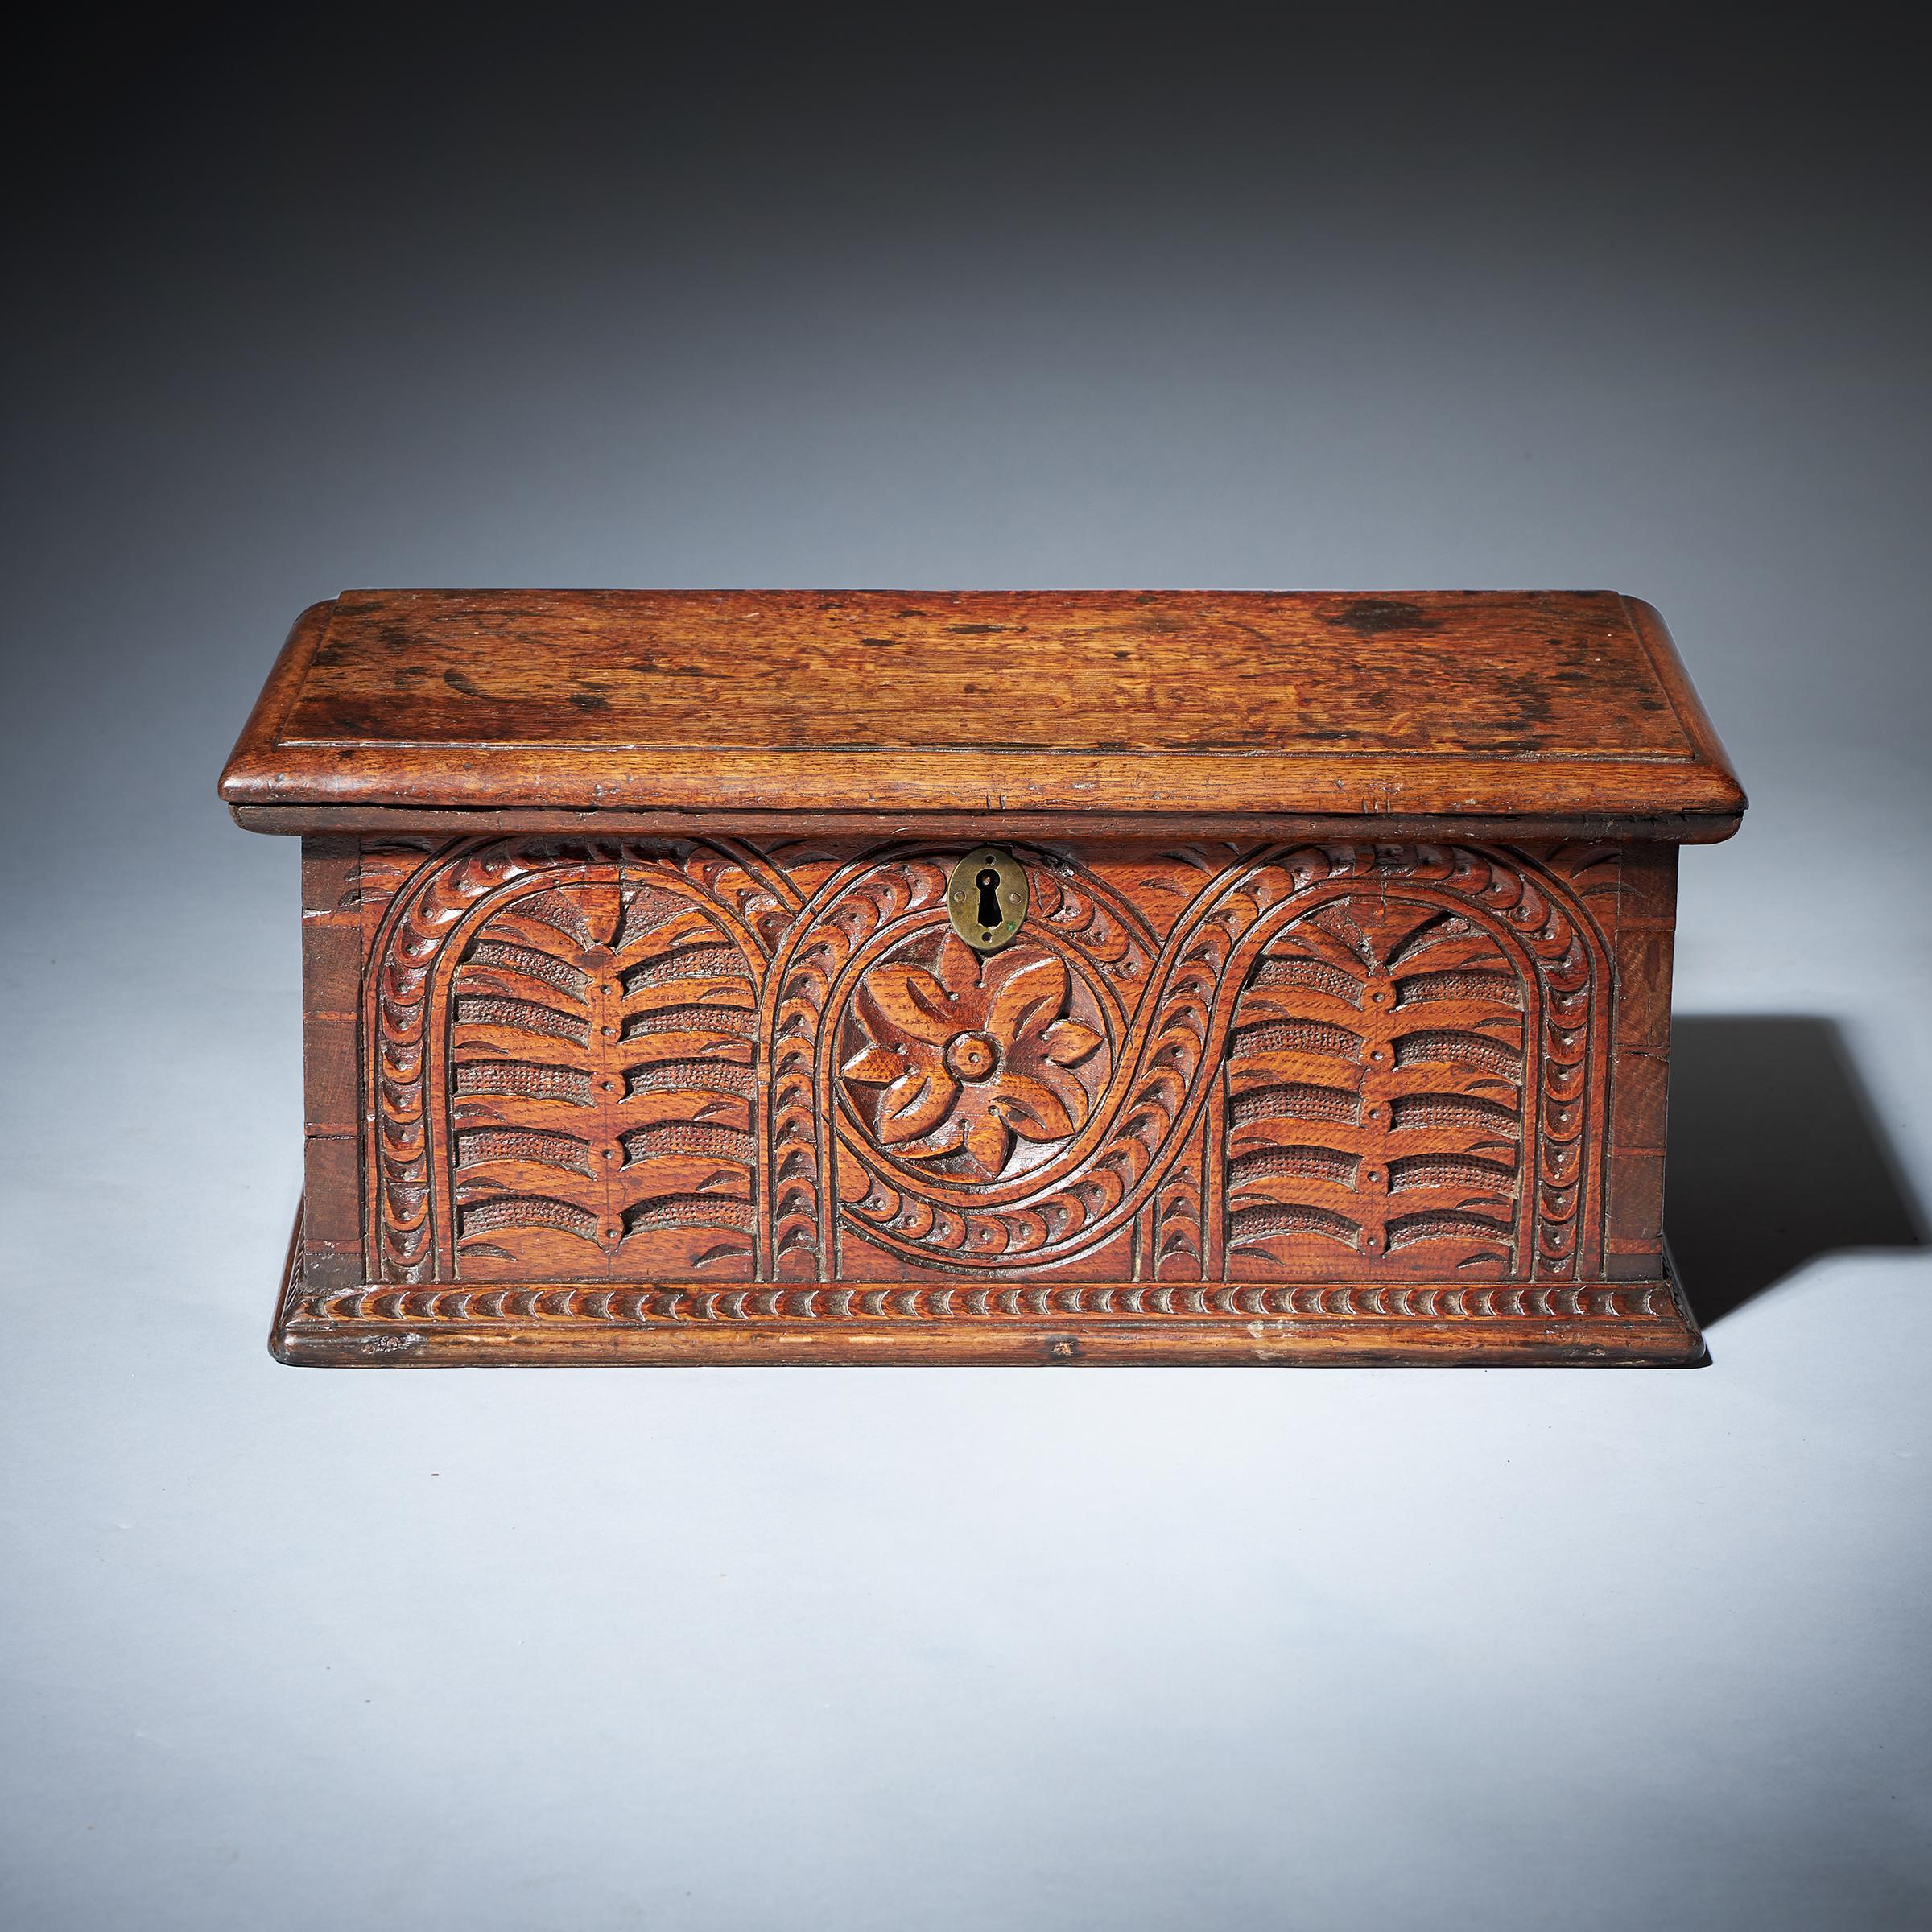 A very charming 17th-century oak deeds box with deep carved decoration to the freize. The box is very well made for the period with visible through dovetails. 

Originally the box would have had two locks, one to the left and one to the right-hand